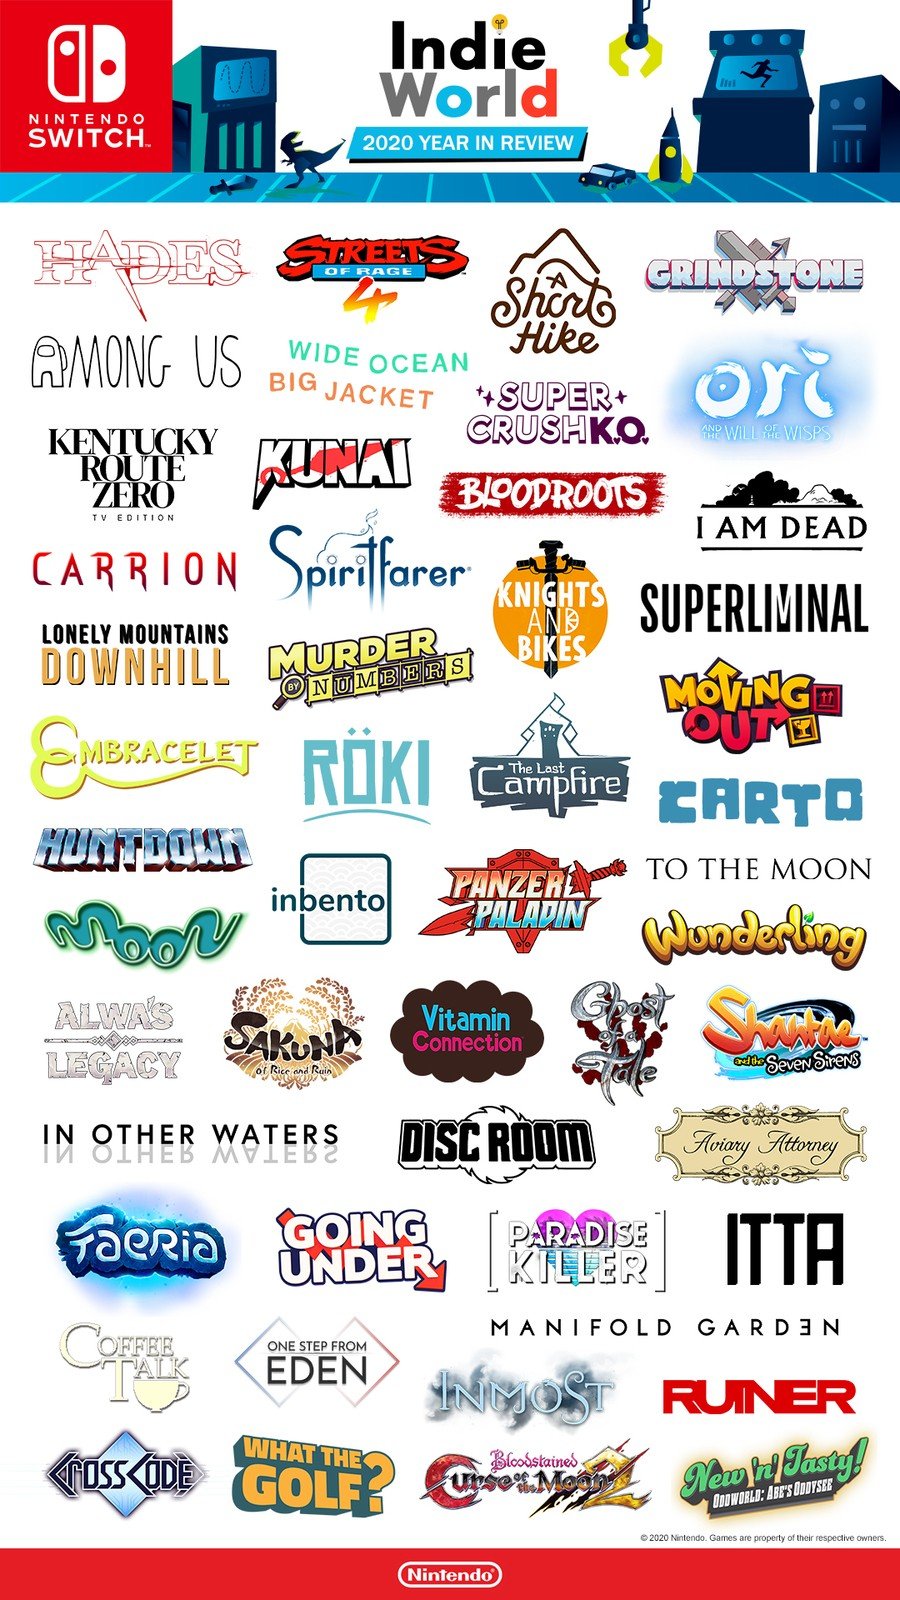 Nintendo Shares Colourful Graphic Of The "Great Indie Games" Released